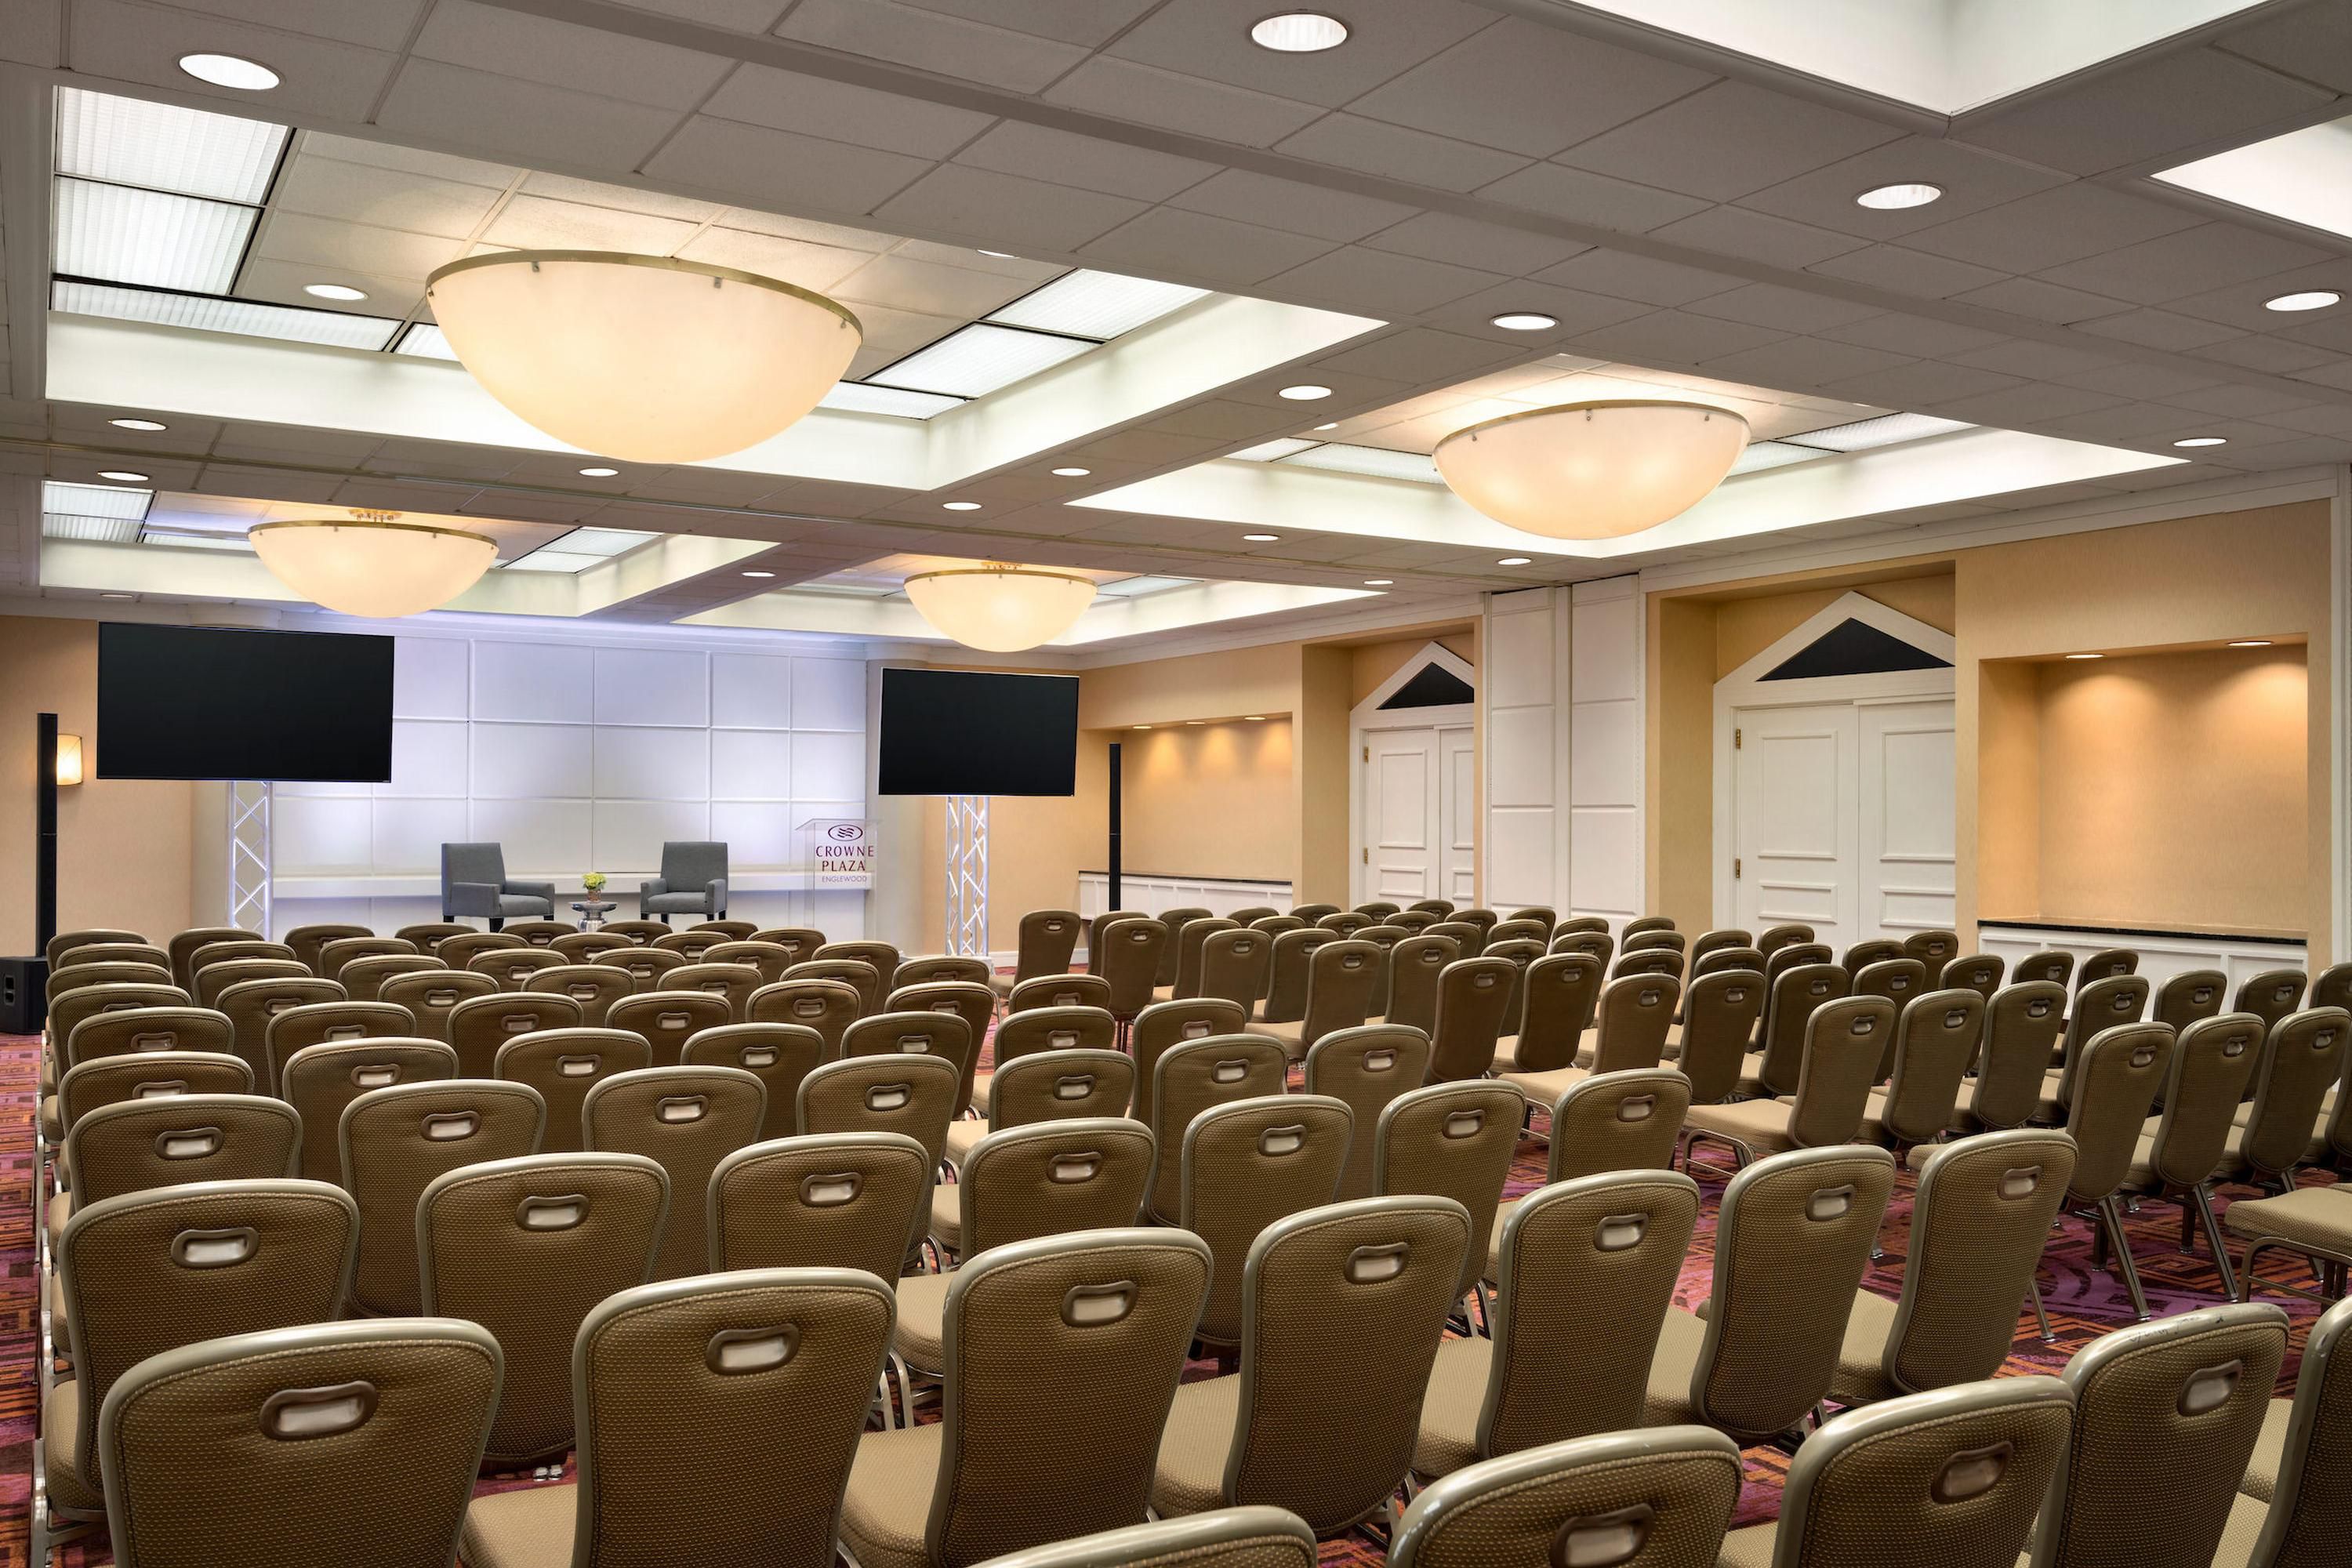 Our Junior Ballroom can host up to 200 attendees.